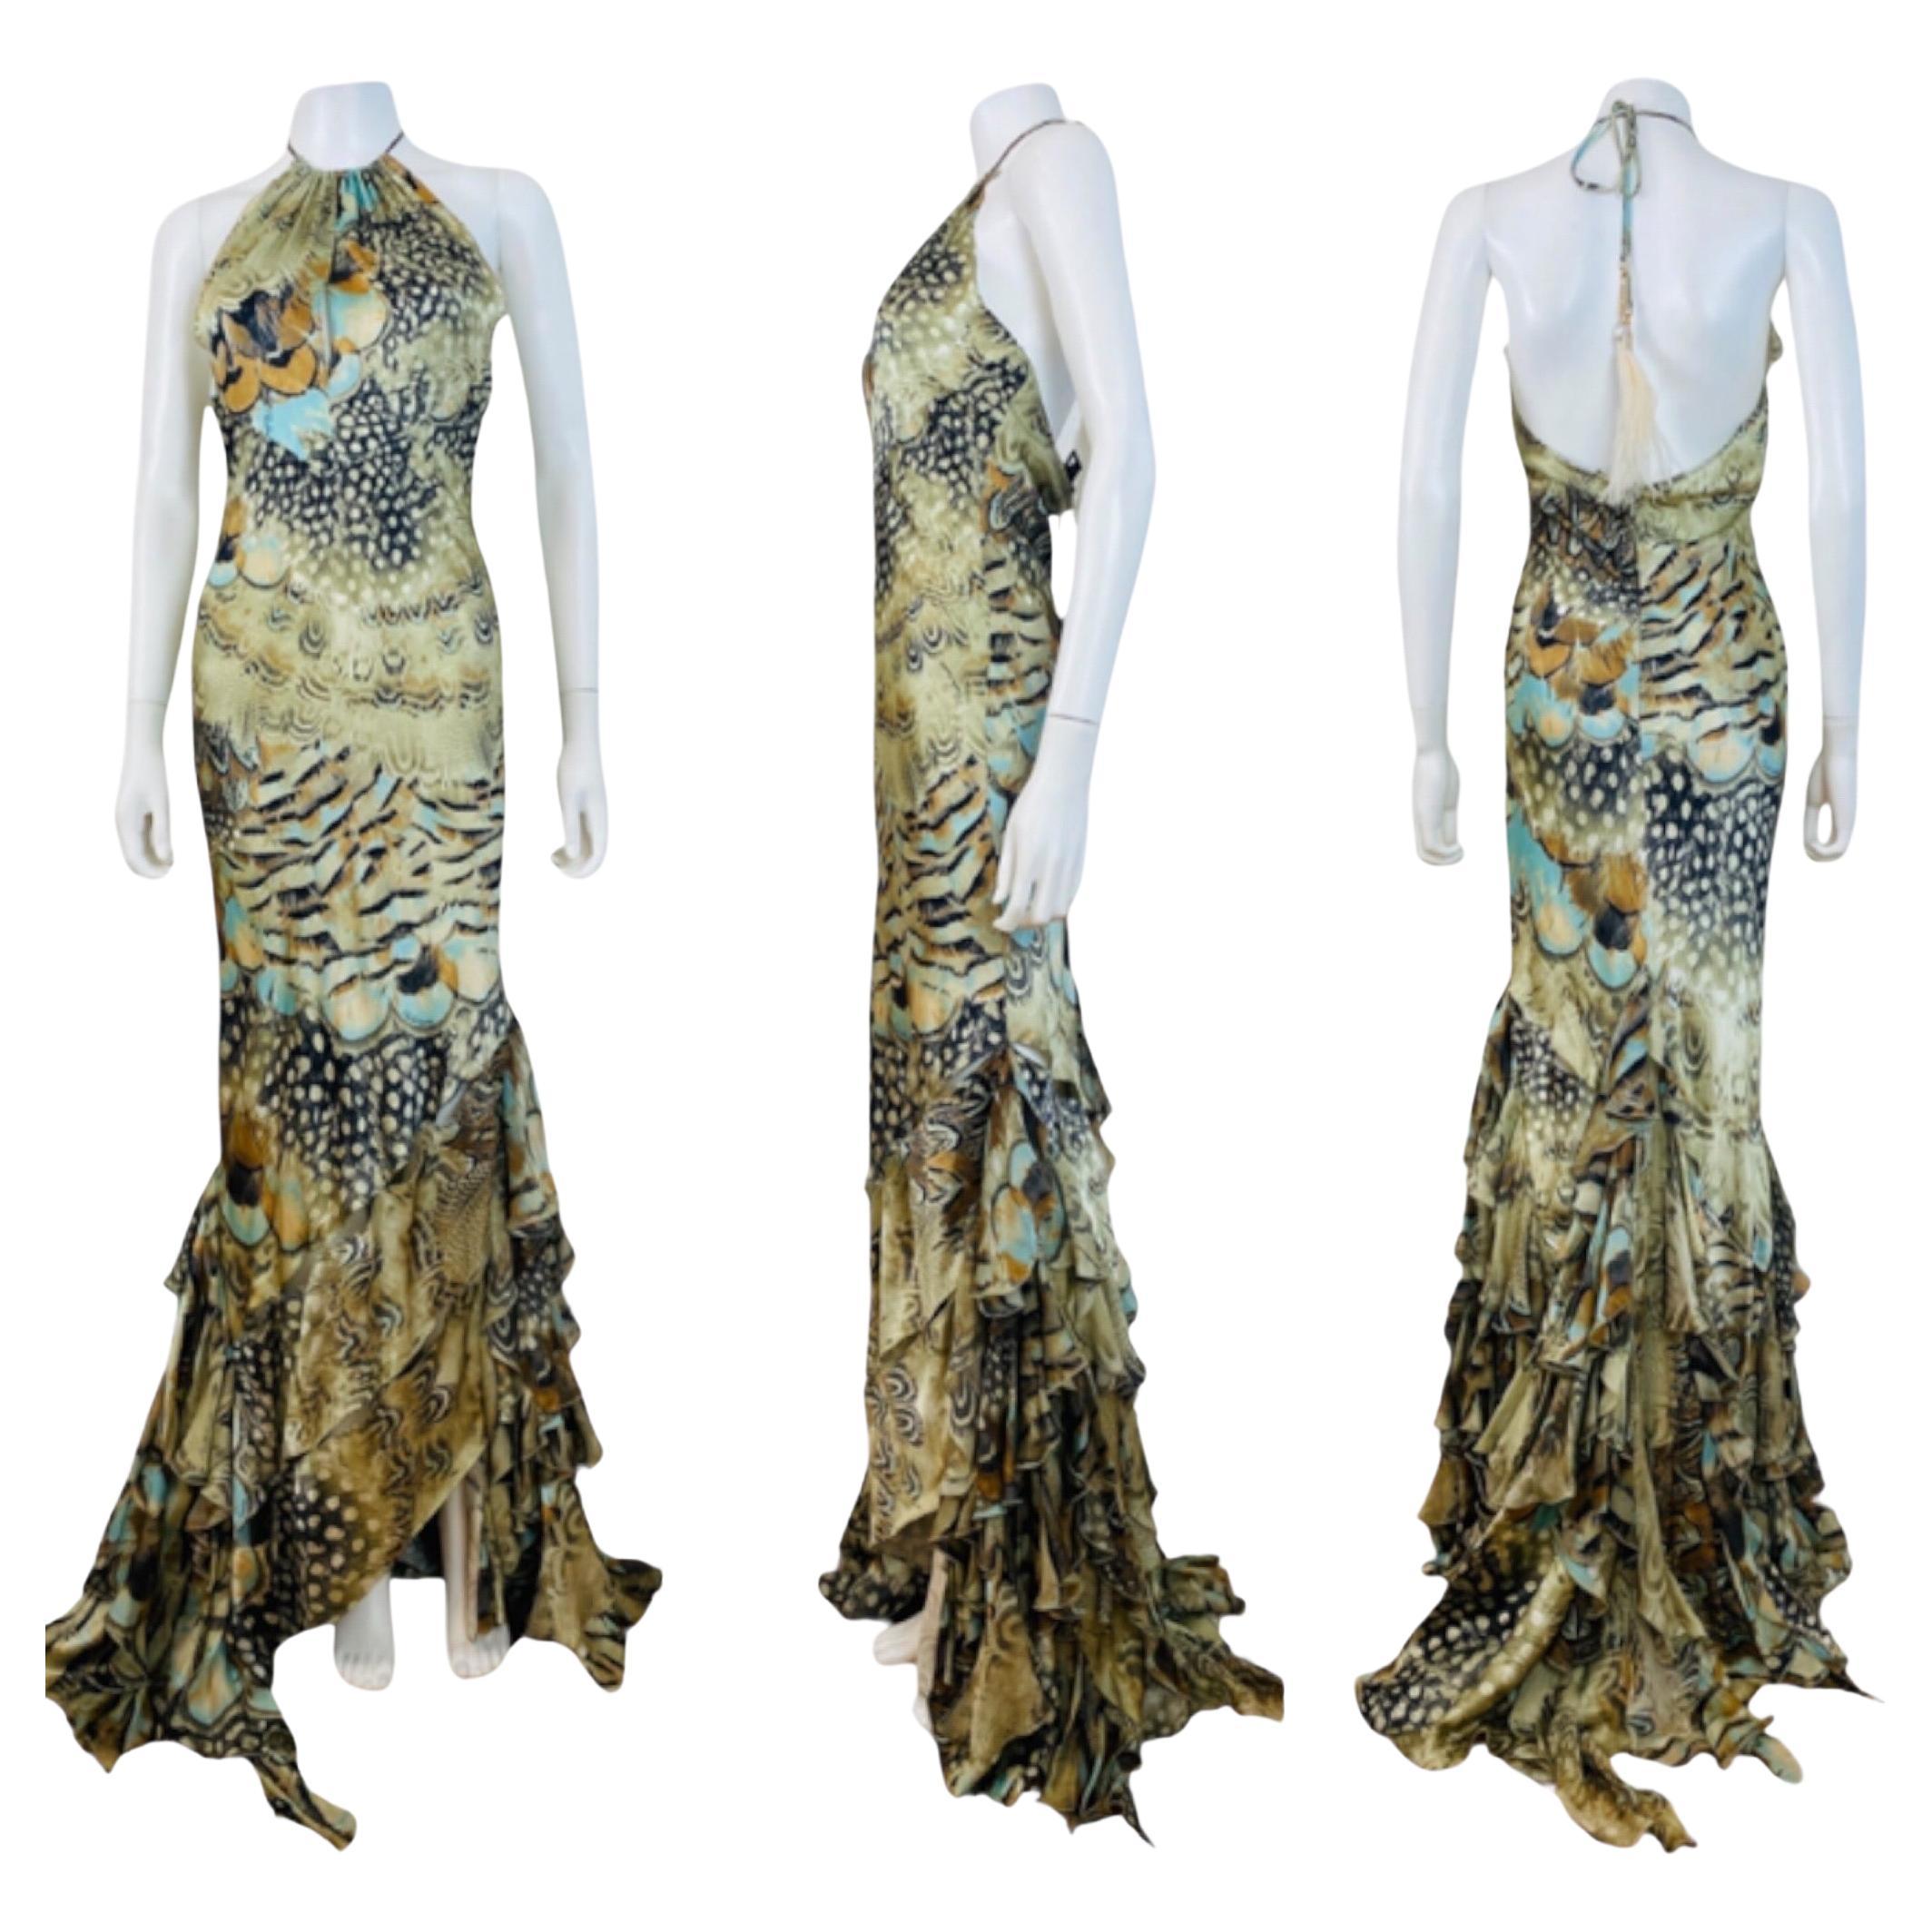 Vintage S/S 2004 Y2K Roberto Cavalli Silk Feather Print Halter Dress Gown Ruffle For Sale